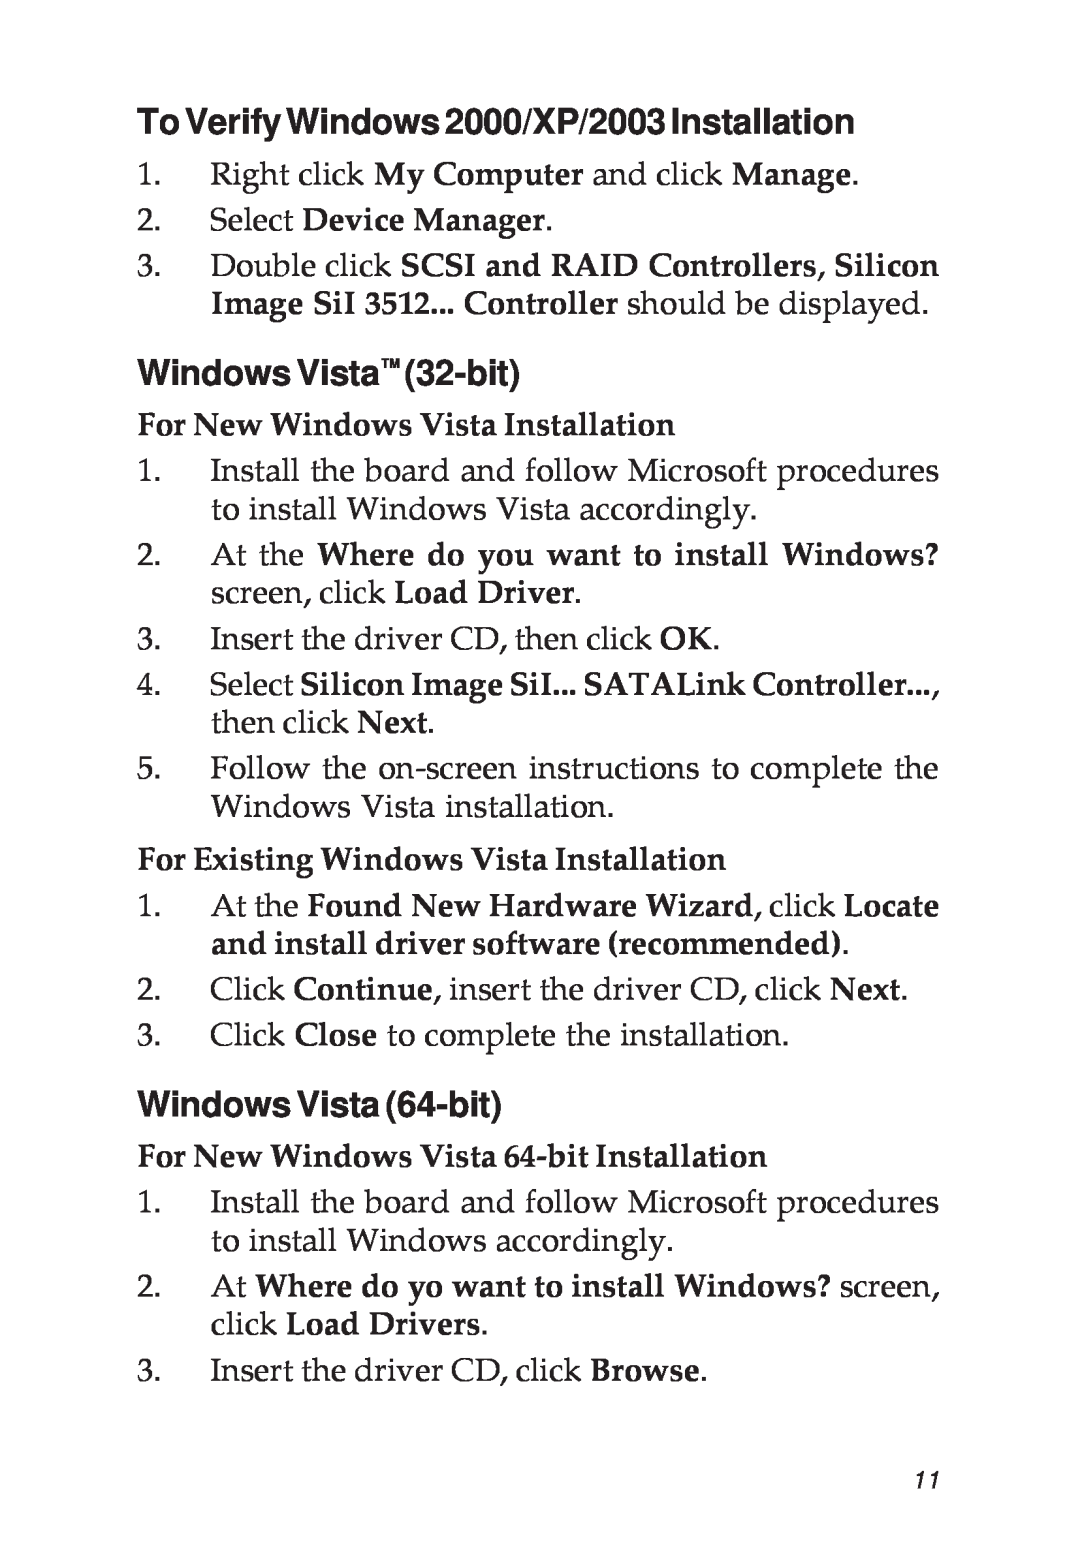 SIIG 04-0265F specifications To Verify Windows 2000/XP/2003 Installation, Windows Vista 32-bit, Windows Vista 64-bit 